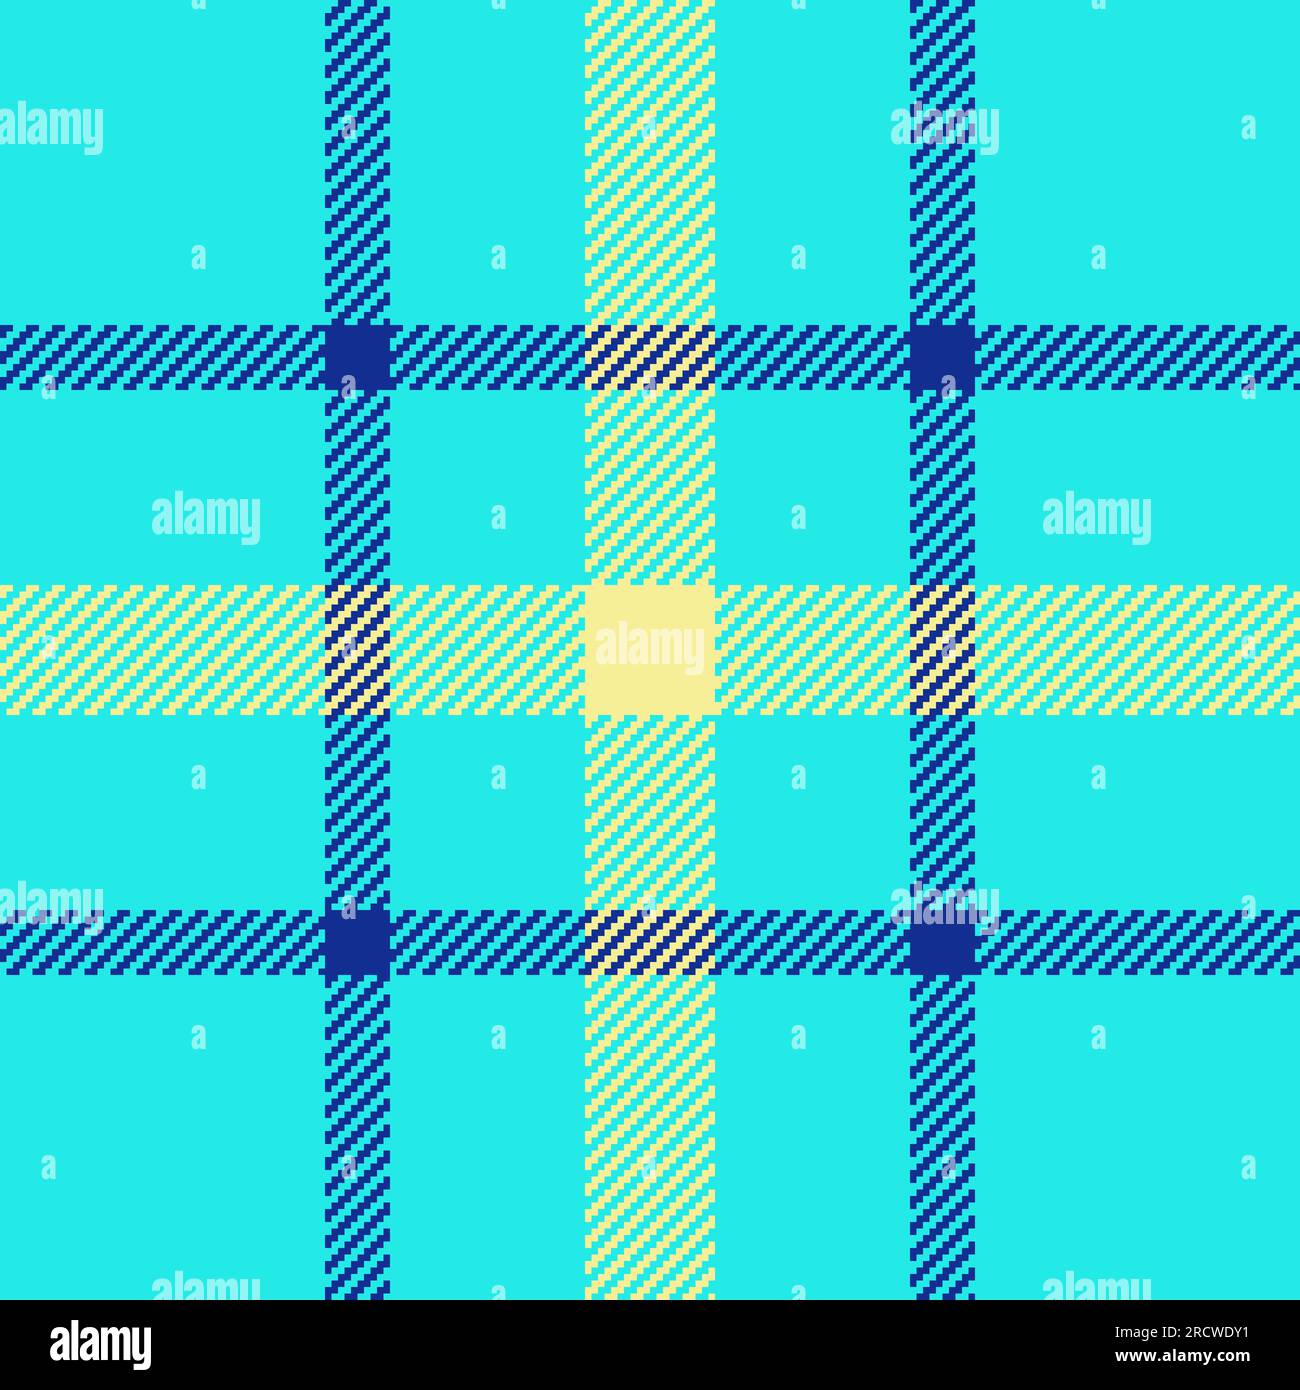 Vector textile seamless of plaid pattern background with a texture fabric check tartan in teal and blue colors. Stock Vector